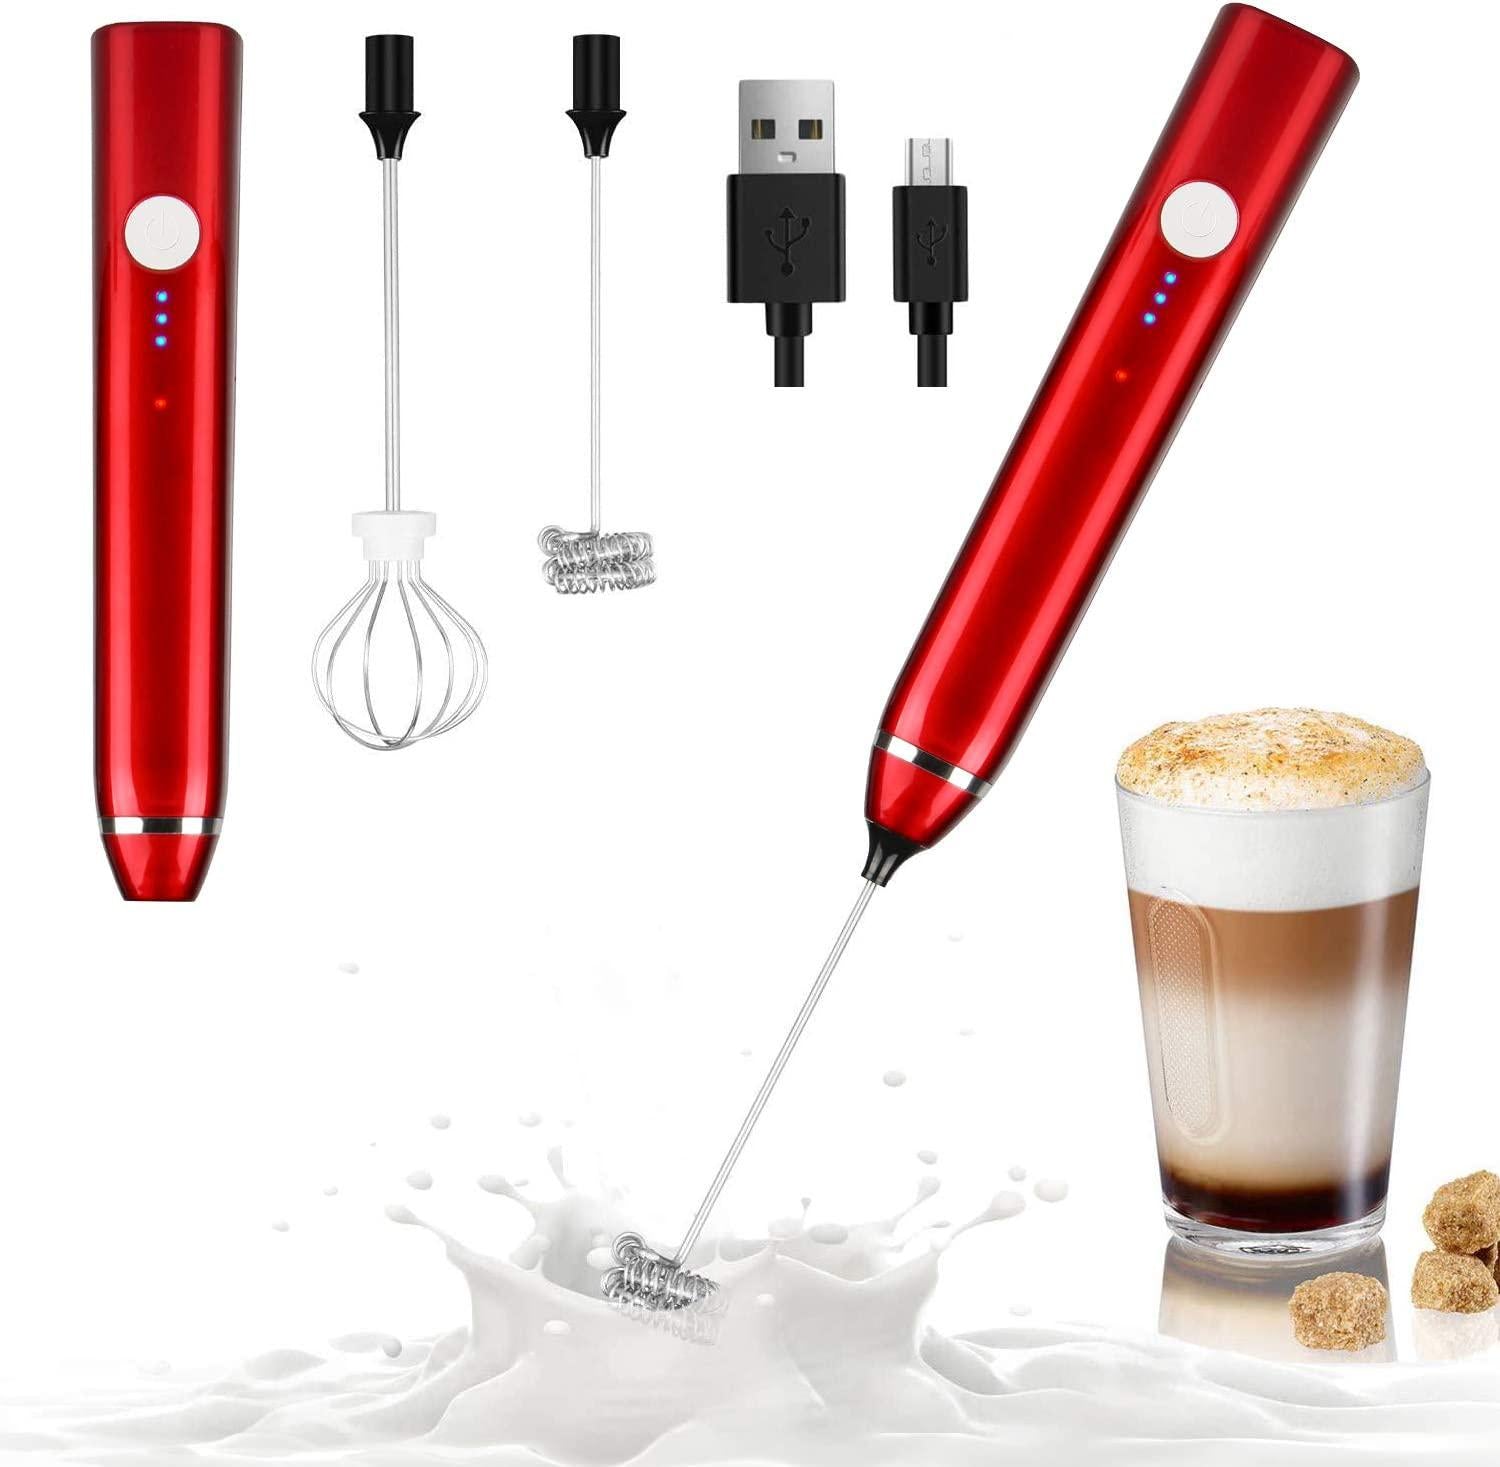 Dallfoll, Milk Frother Handheld, Dallfoll USB Rechargeable Electric Foam Maker for Coffee, 3 Speeds Mini Milk Foamer Drink Mixer with 2 Whisks for Bulletproof Coffee Keto Frappe Latte Cappuccino (Red)